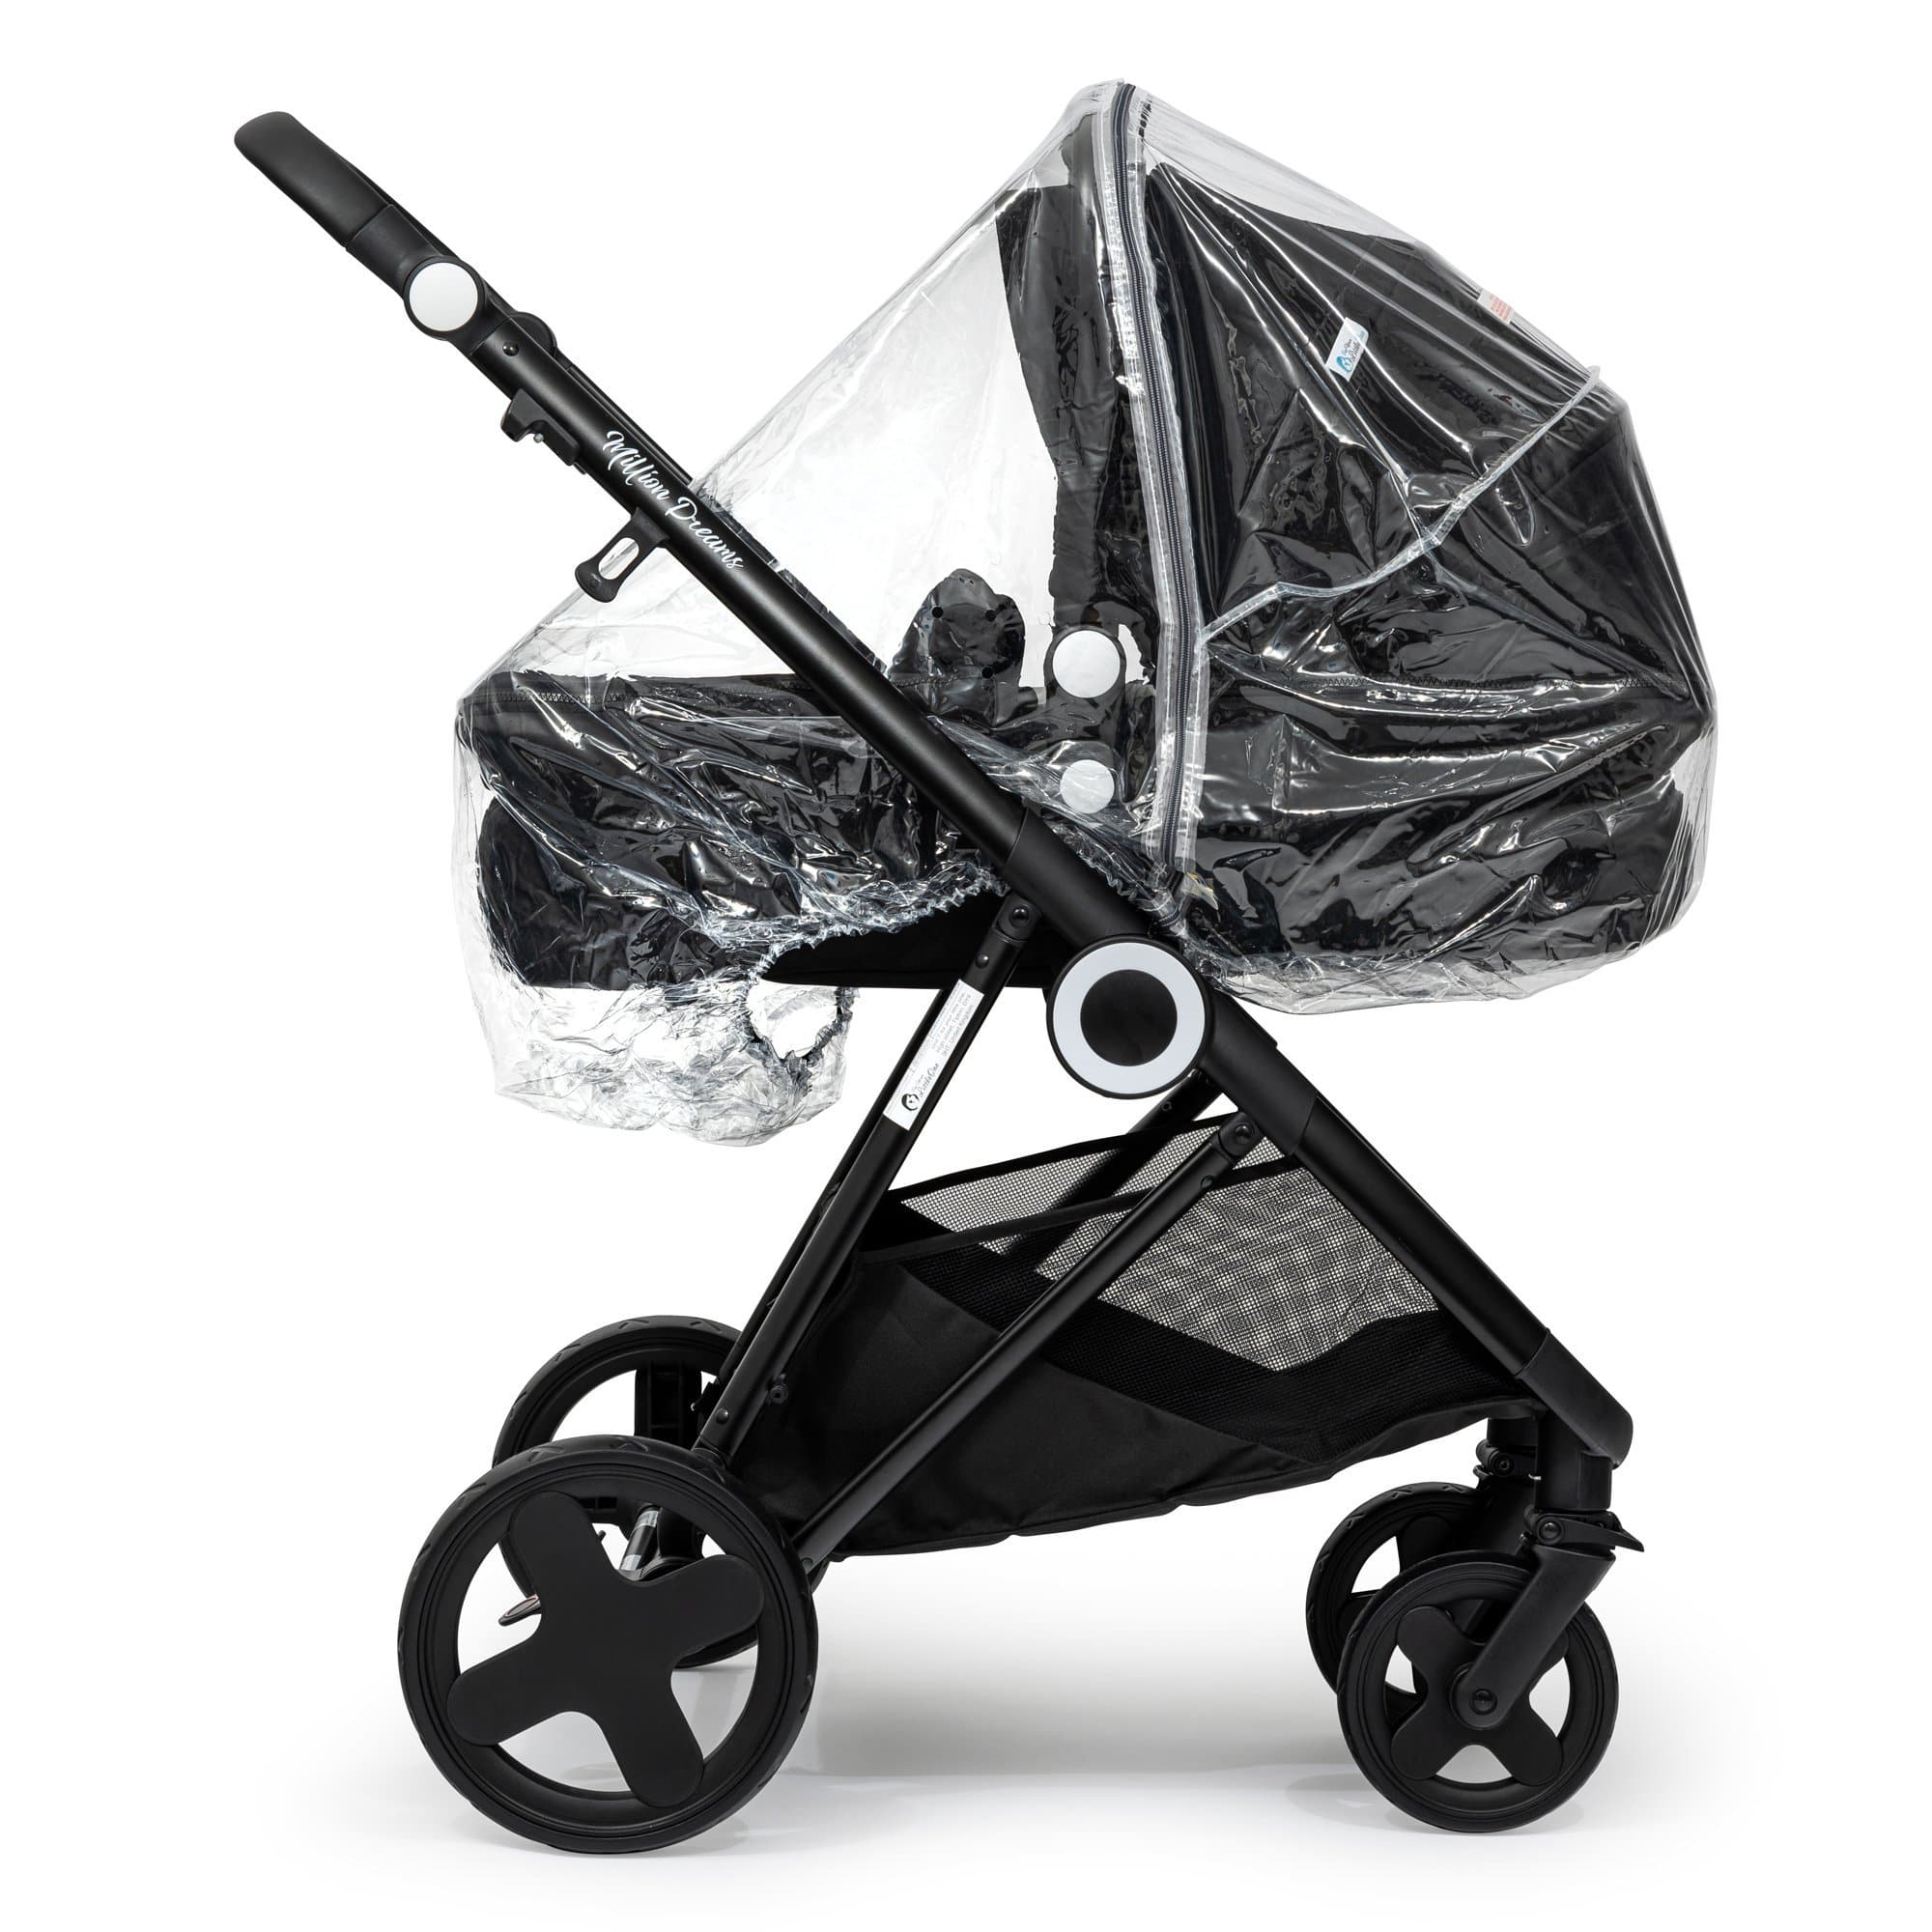 2 in 1 Rain Cover Compatible with Baby Jogger - Fits All Models -  | For Your Little One